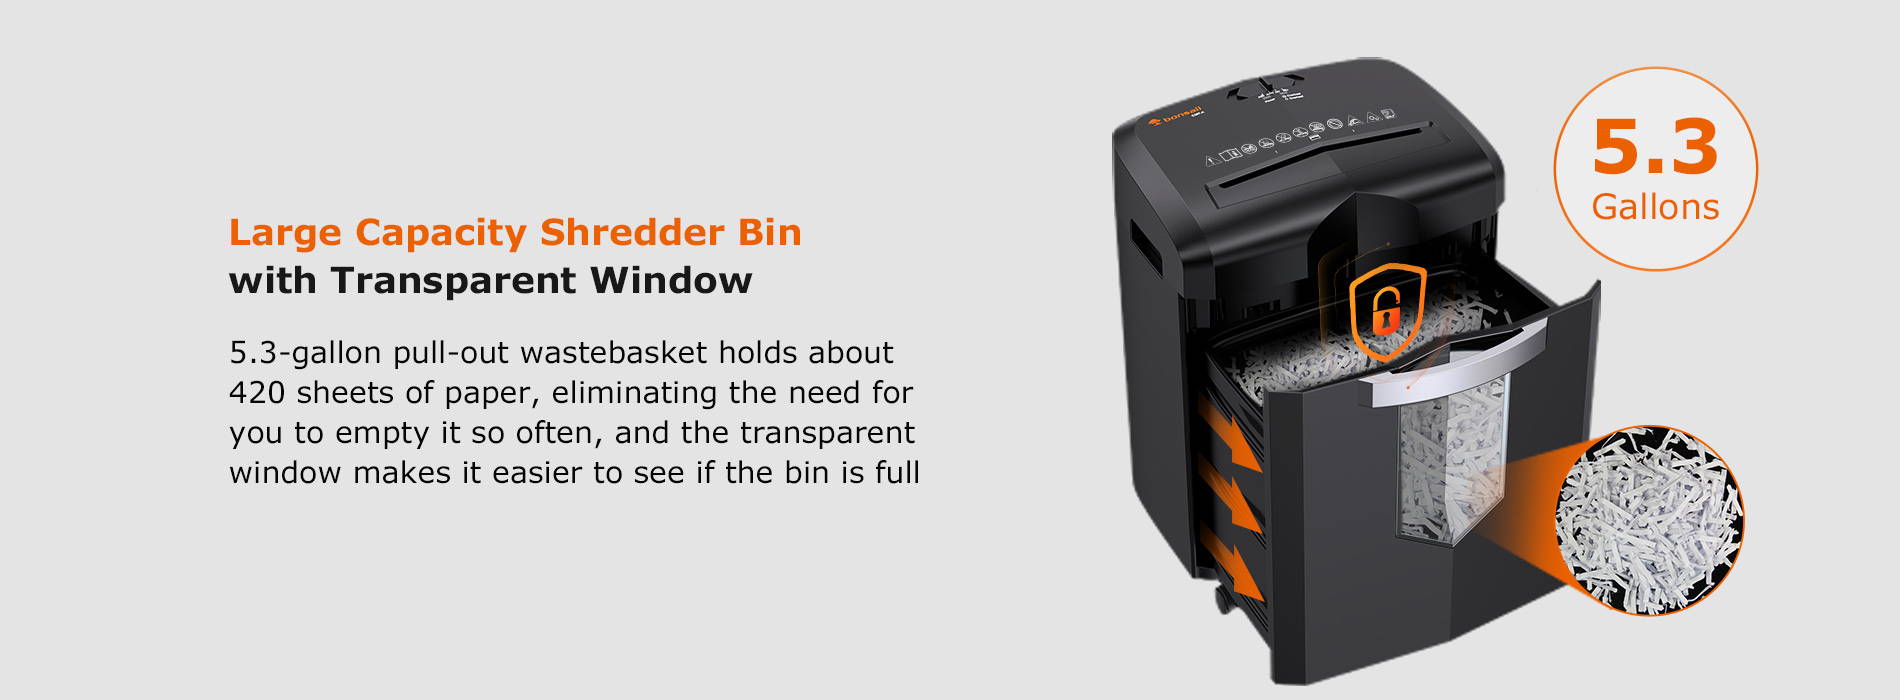 Large Capacity Shredder Bin with Transparent Window  5.3-gallon pull-out wastebasket holds about 420 sheets of paper, eliminating the need for you to empty it so often, and the transparent.window makes it easier to see if the bin is full